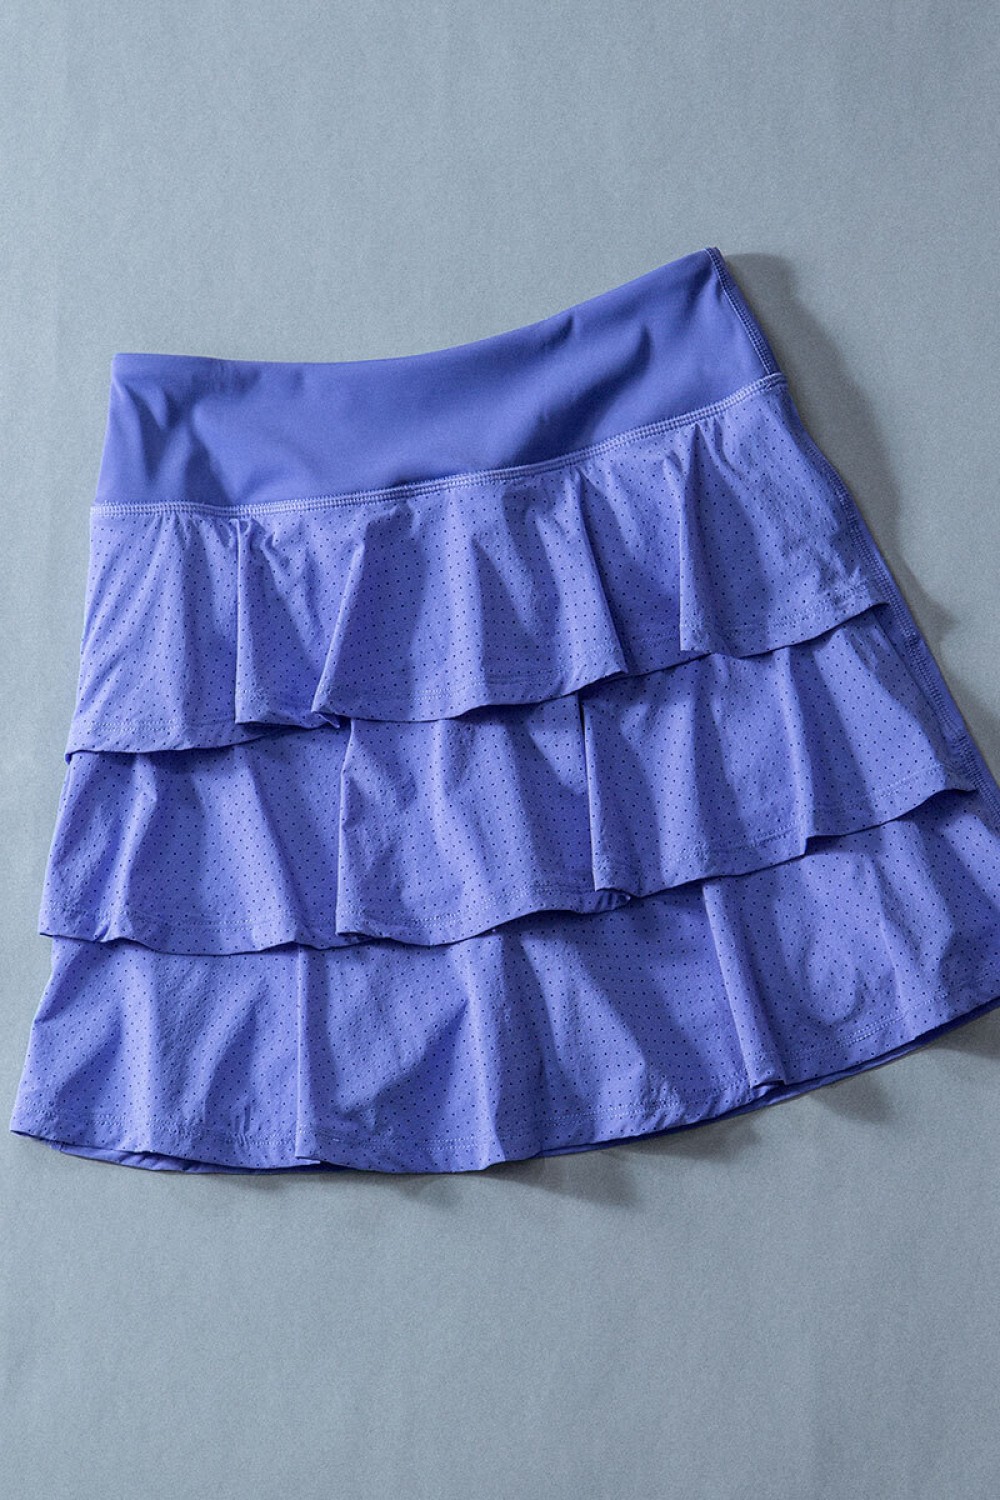 ATHELETIC TIERED RUFFLE TENNIS SKIRT SHORTS